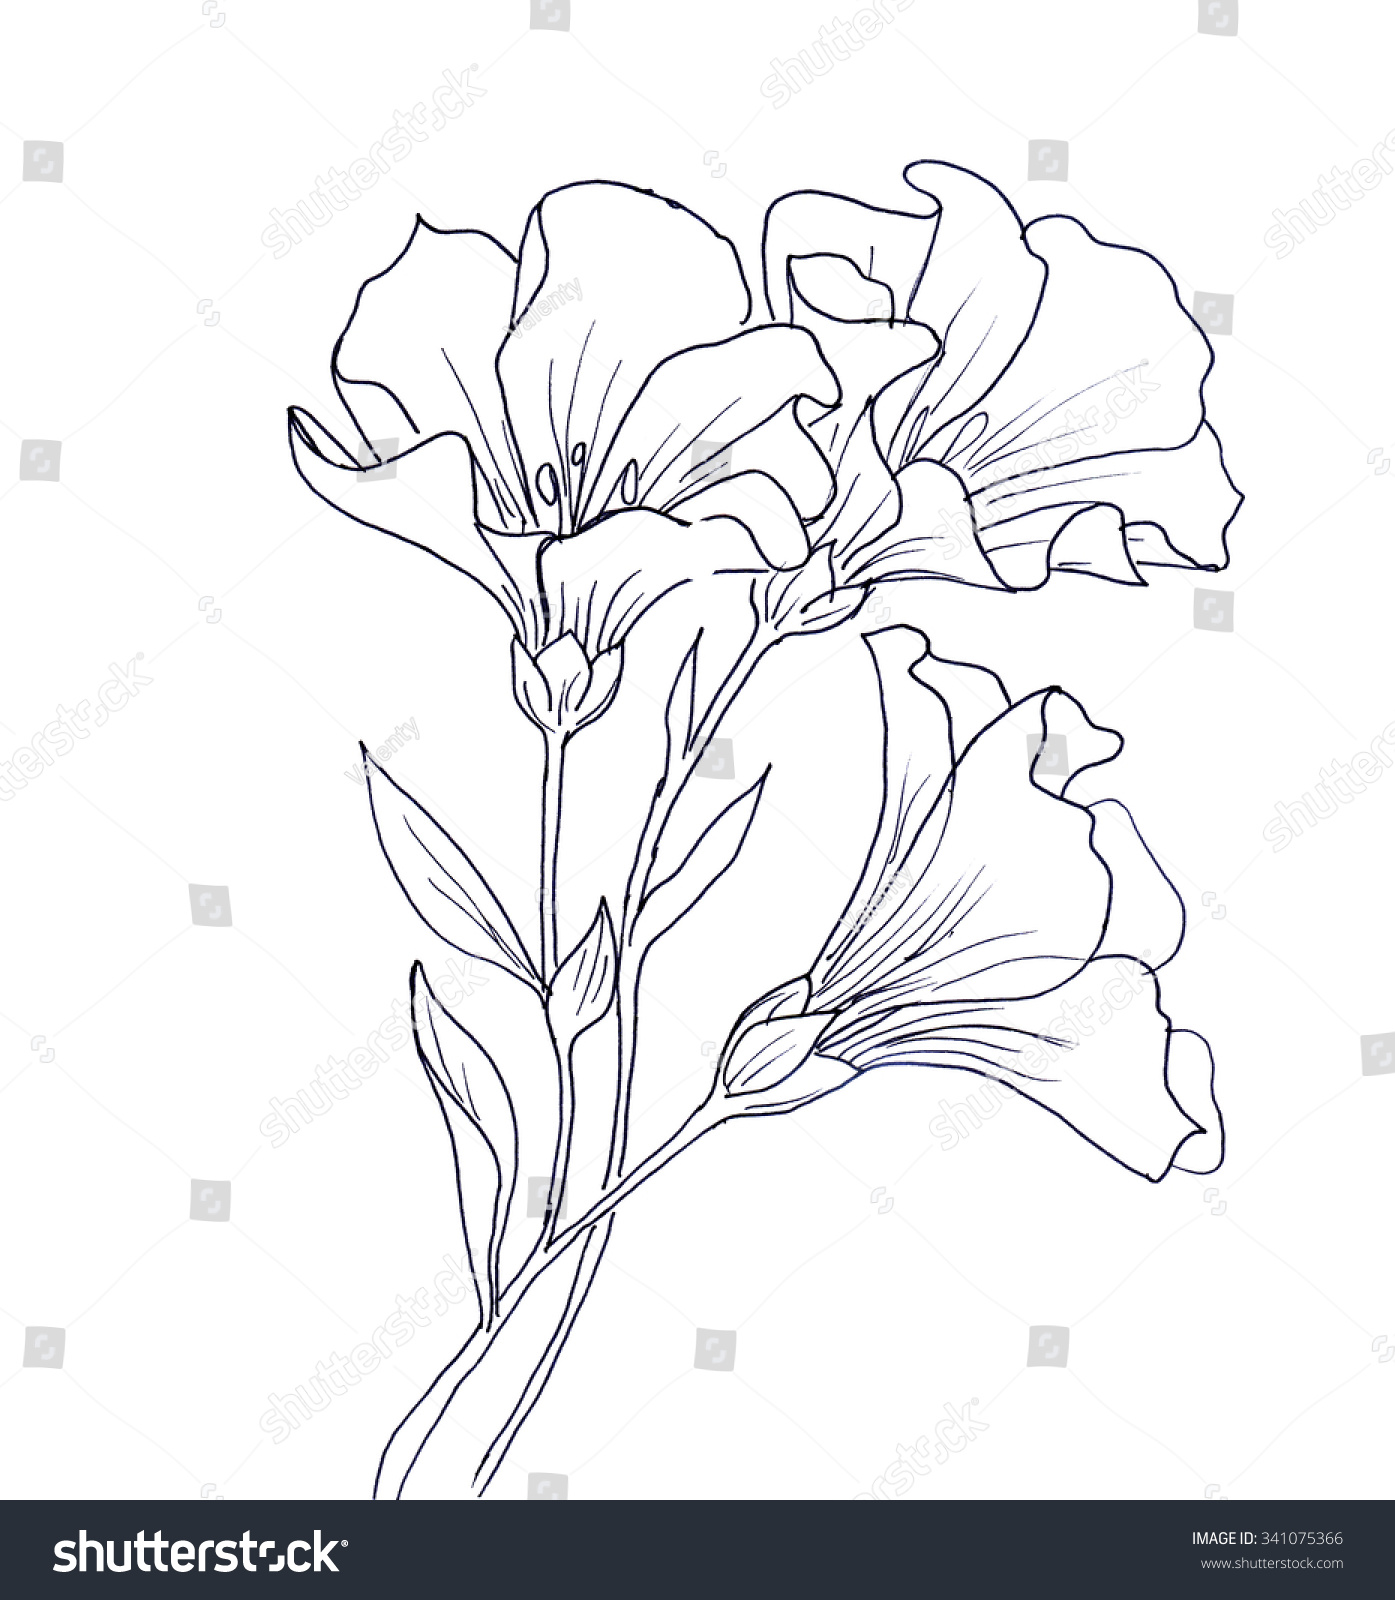 Line Ink Drawing Of Flower With Butterfly Black Royalty Free Stock Photo Avopix Com